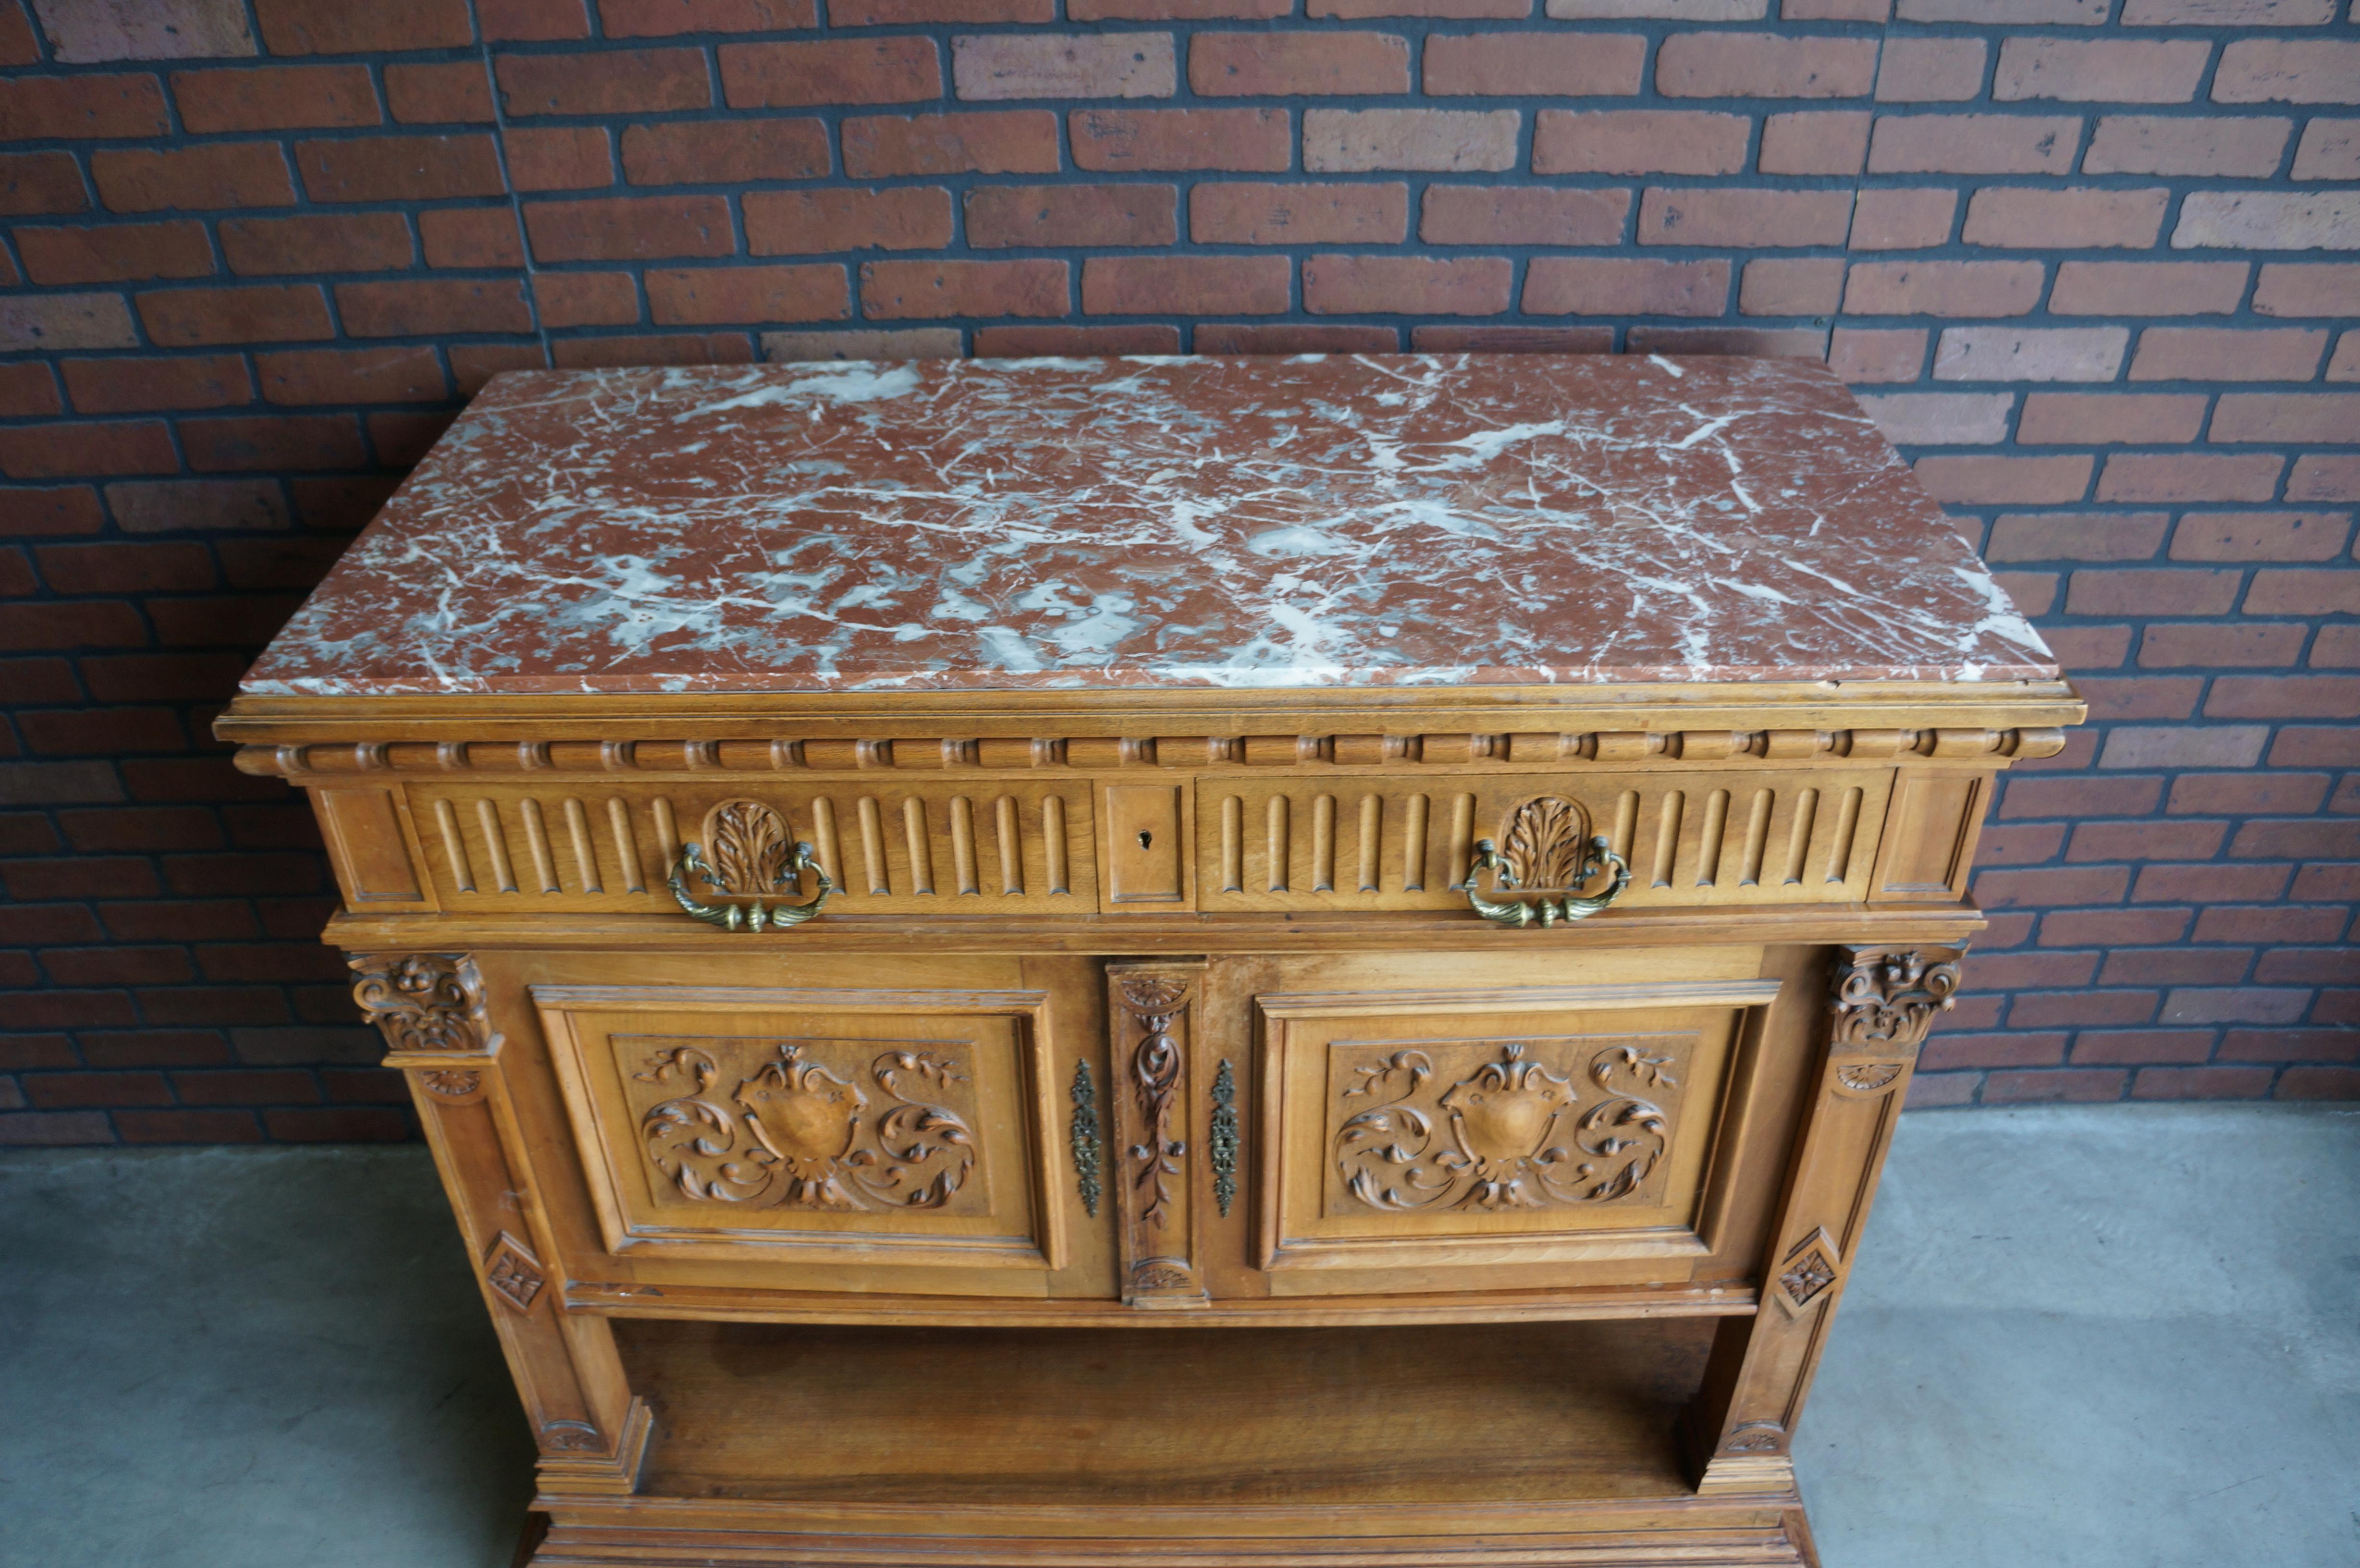 Magnificent Renaissance marble top buffet. Inspired by classic architectural details of the time. Featuring marble inset top, two drawers with cast brass drop pulls, egg and dart detail, multi-tiered base and bun feet. Two doors with exquisite